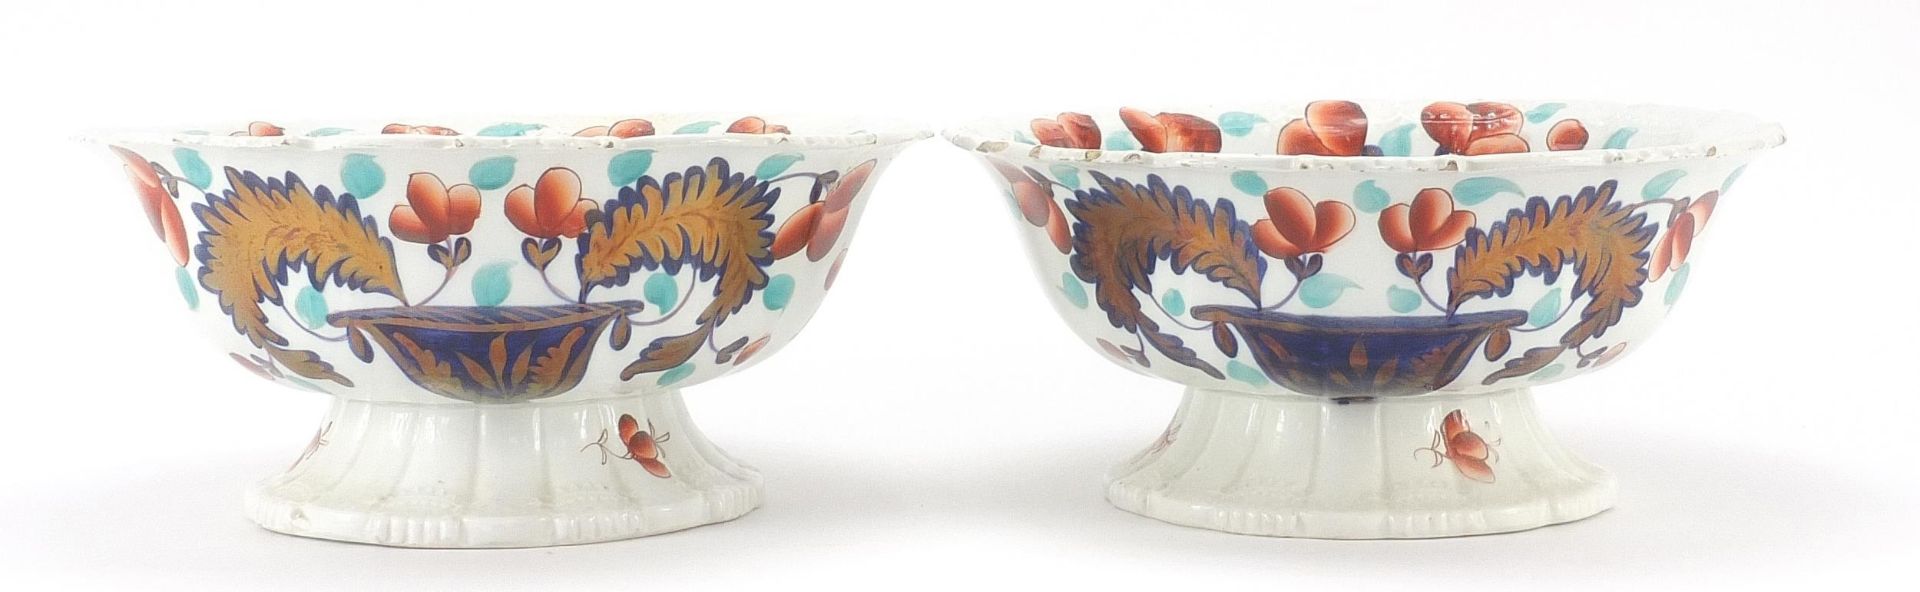 Pair of Victorian ironstone centre bowls decorated with flowers and foliage, each 29cm in diameter